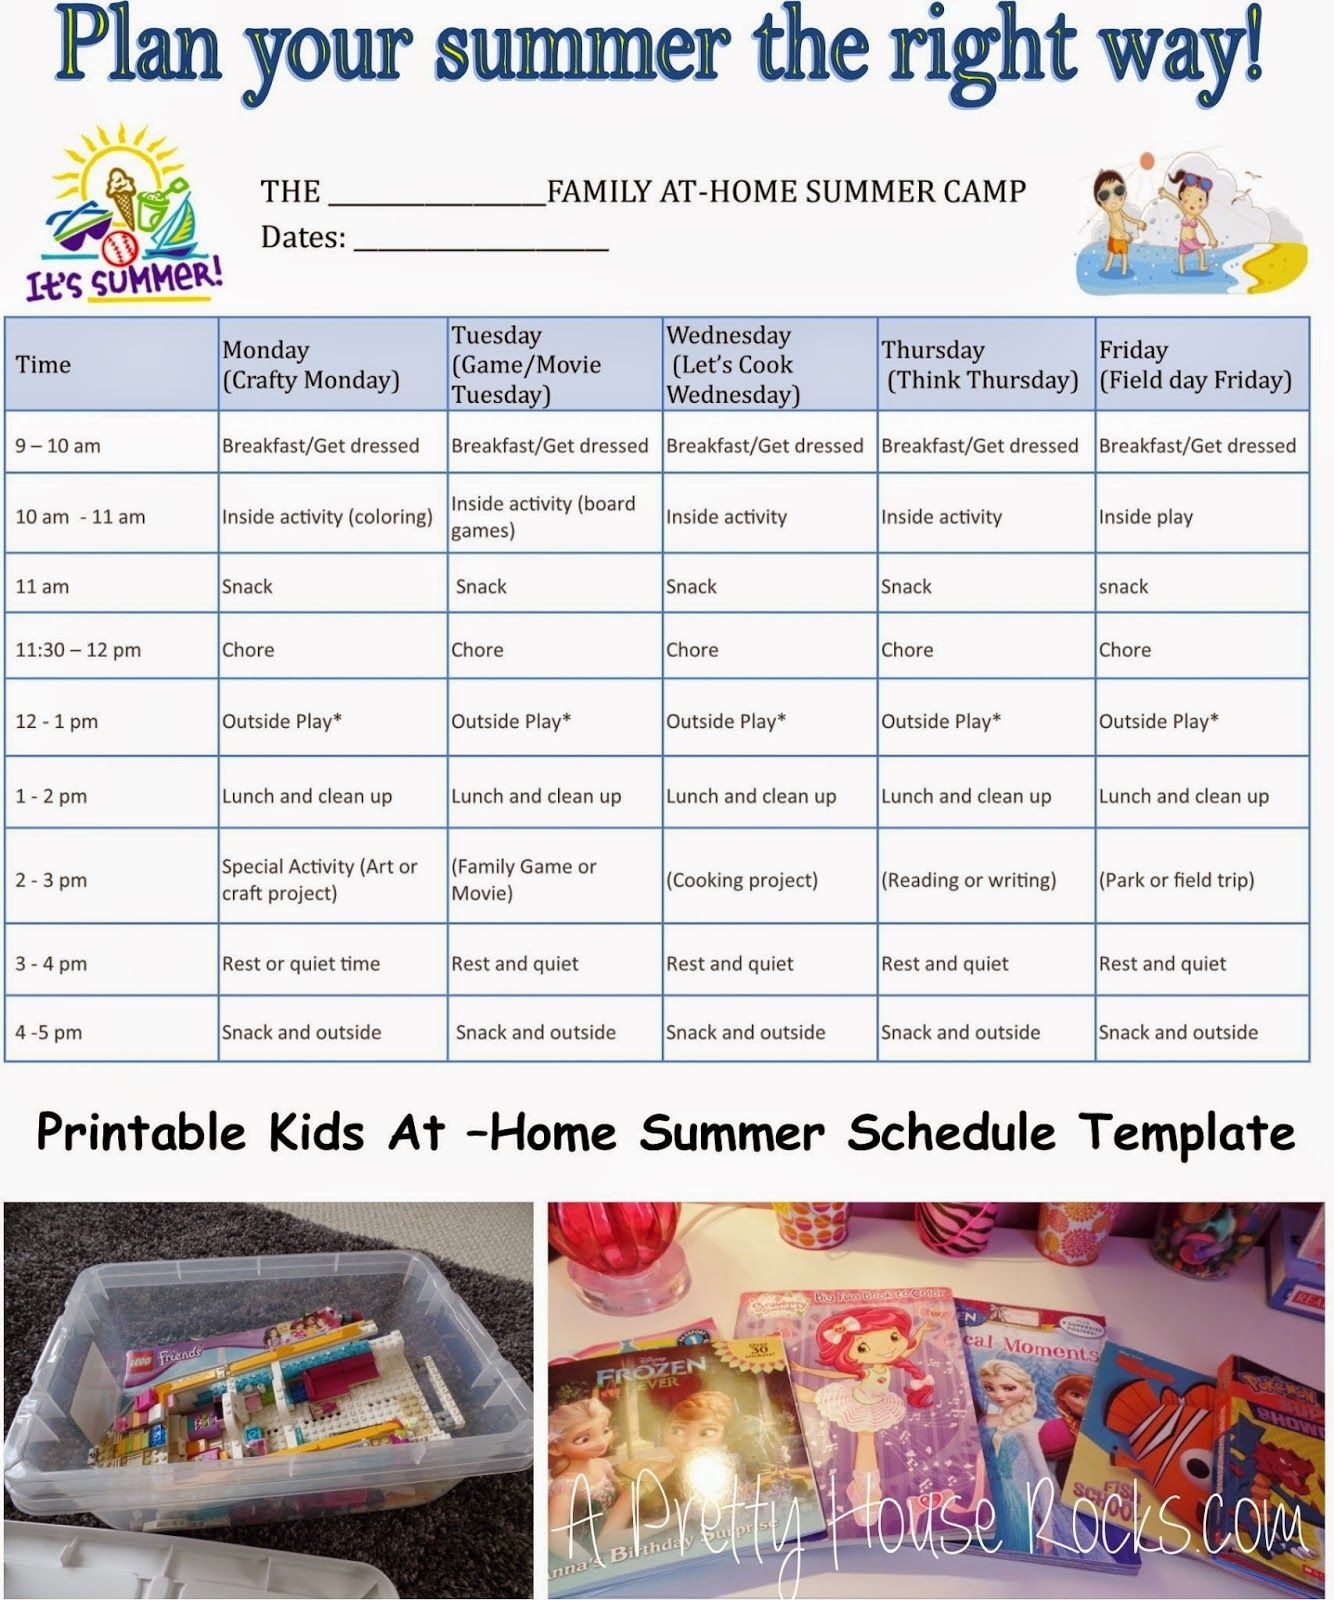 Kids At-Home Summer Camp Schedule - Printable Template - A-Summer Camp Schedule Template Editable